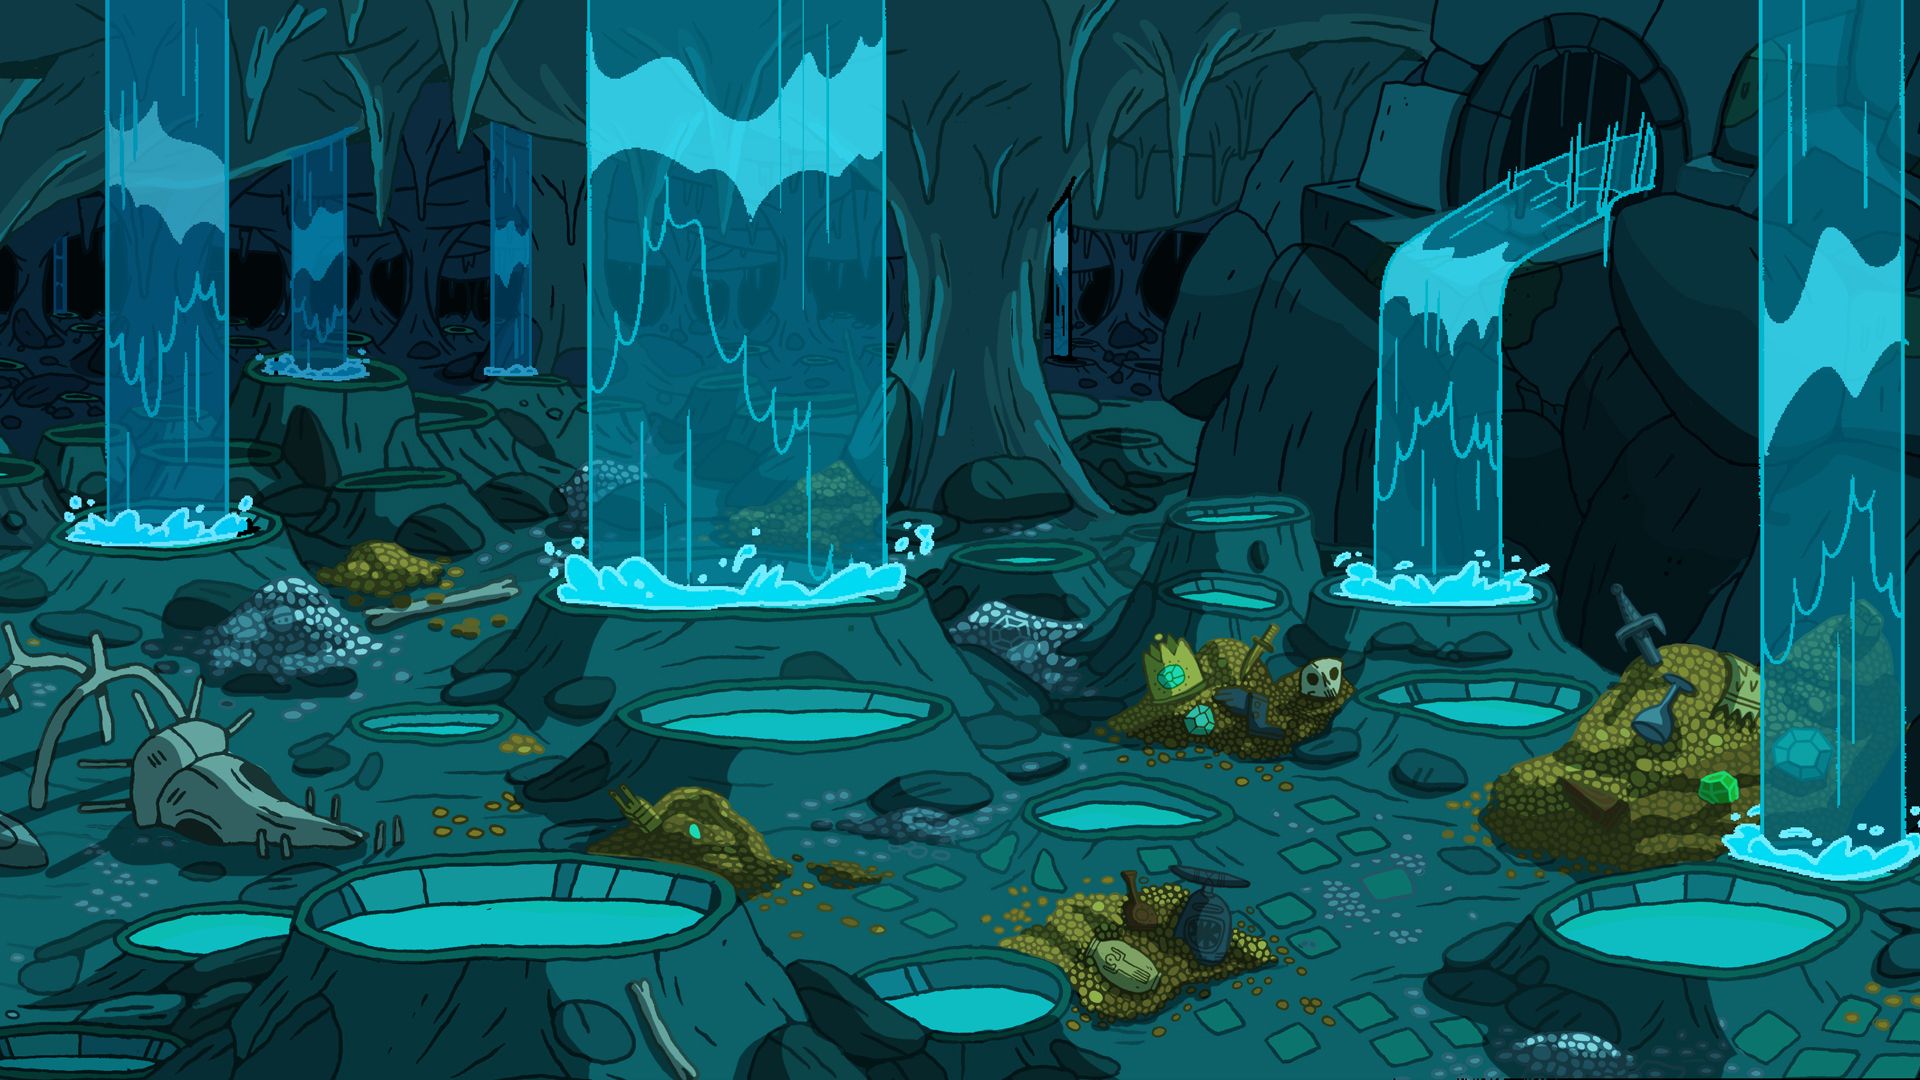 A cave with a large number of blue pools of water, some of which have floating islands in them. A large green snake is visible in the foreground. - Adventure Time